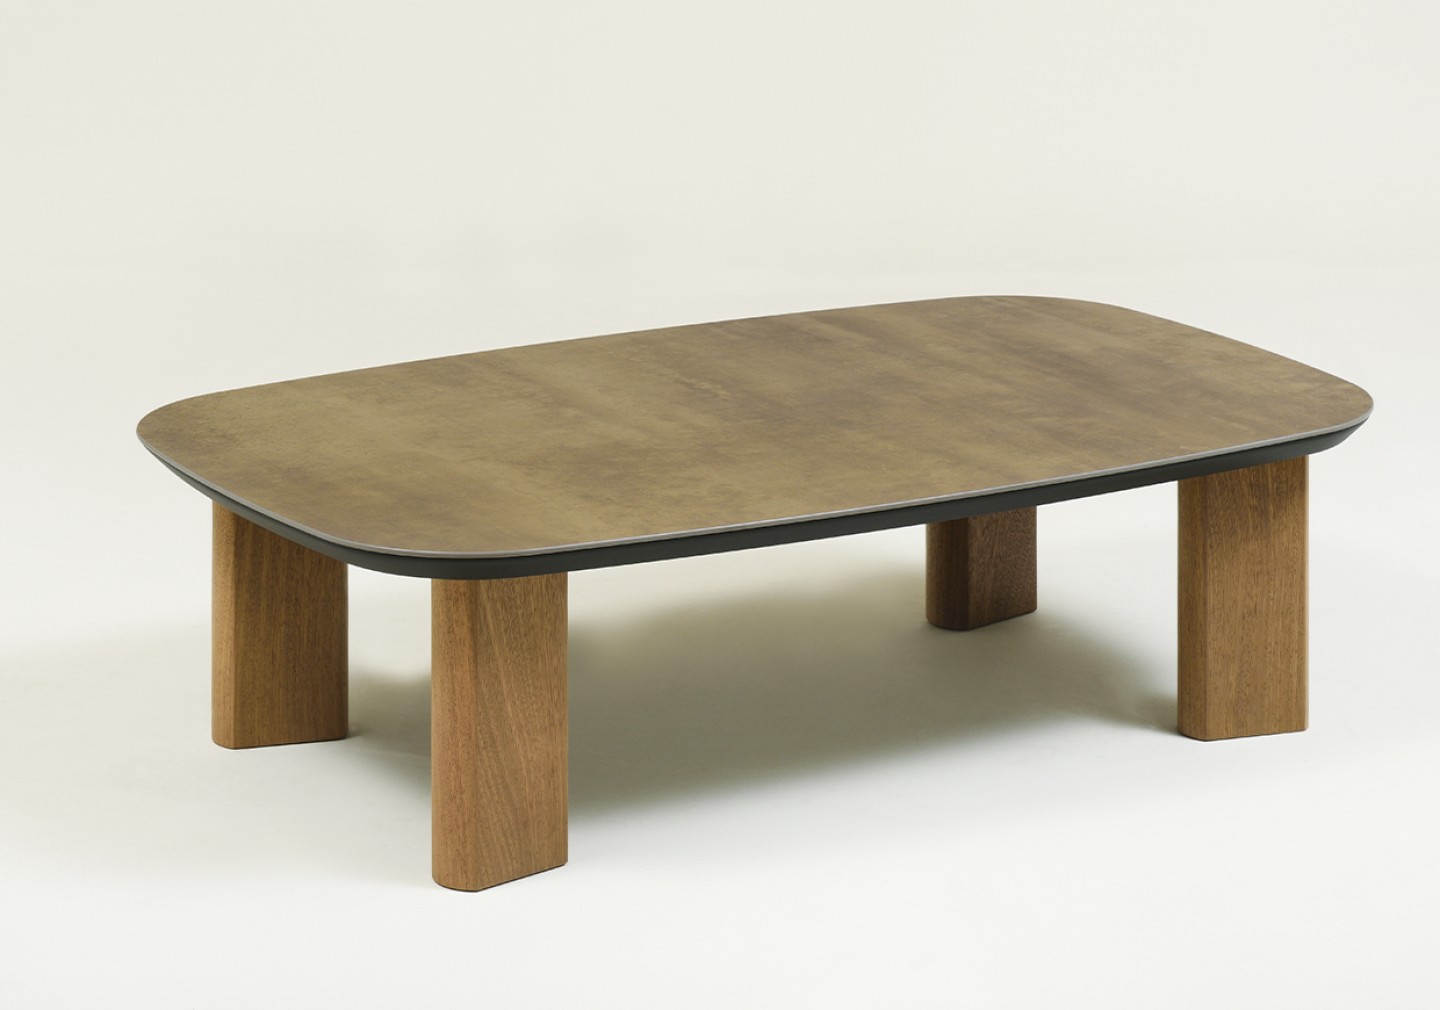 THE SILAS COFFEE TABLE